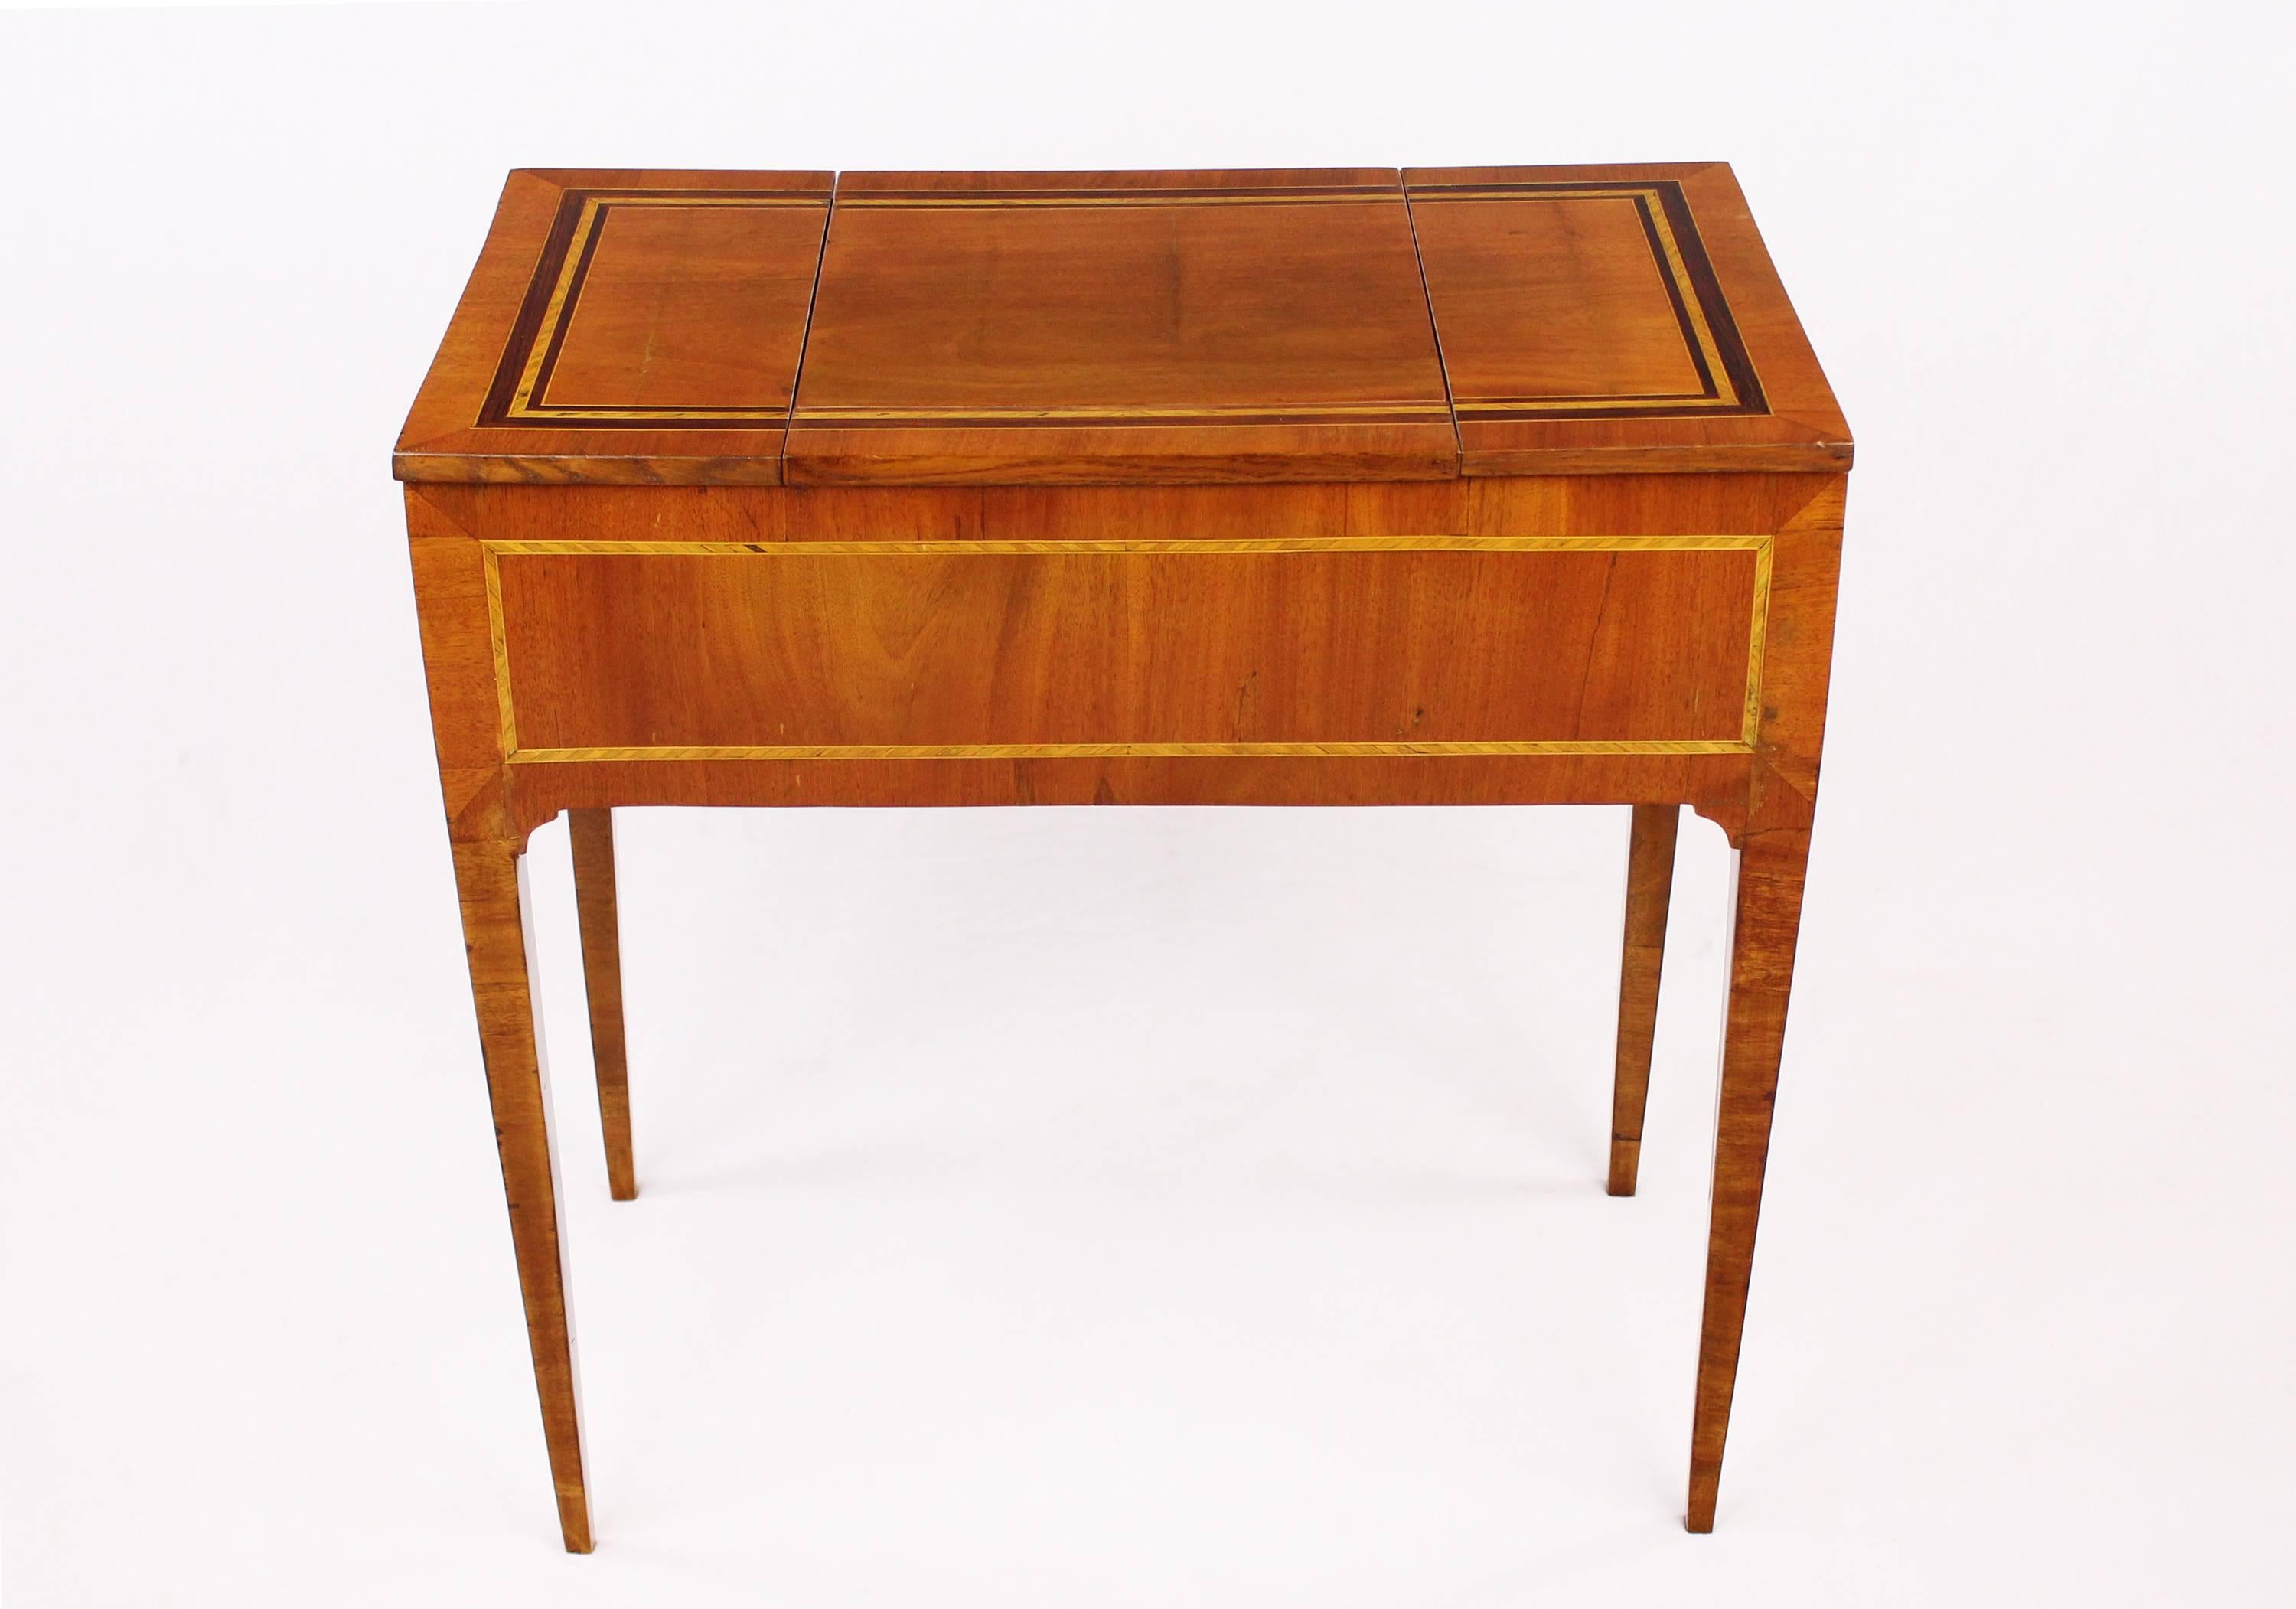 Early 19th Century Dressing Table, Poudreuse, Mahogany Veneered, Marquetry Works 1